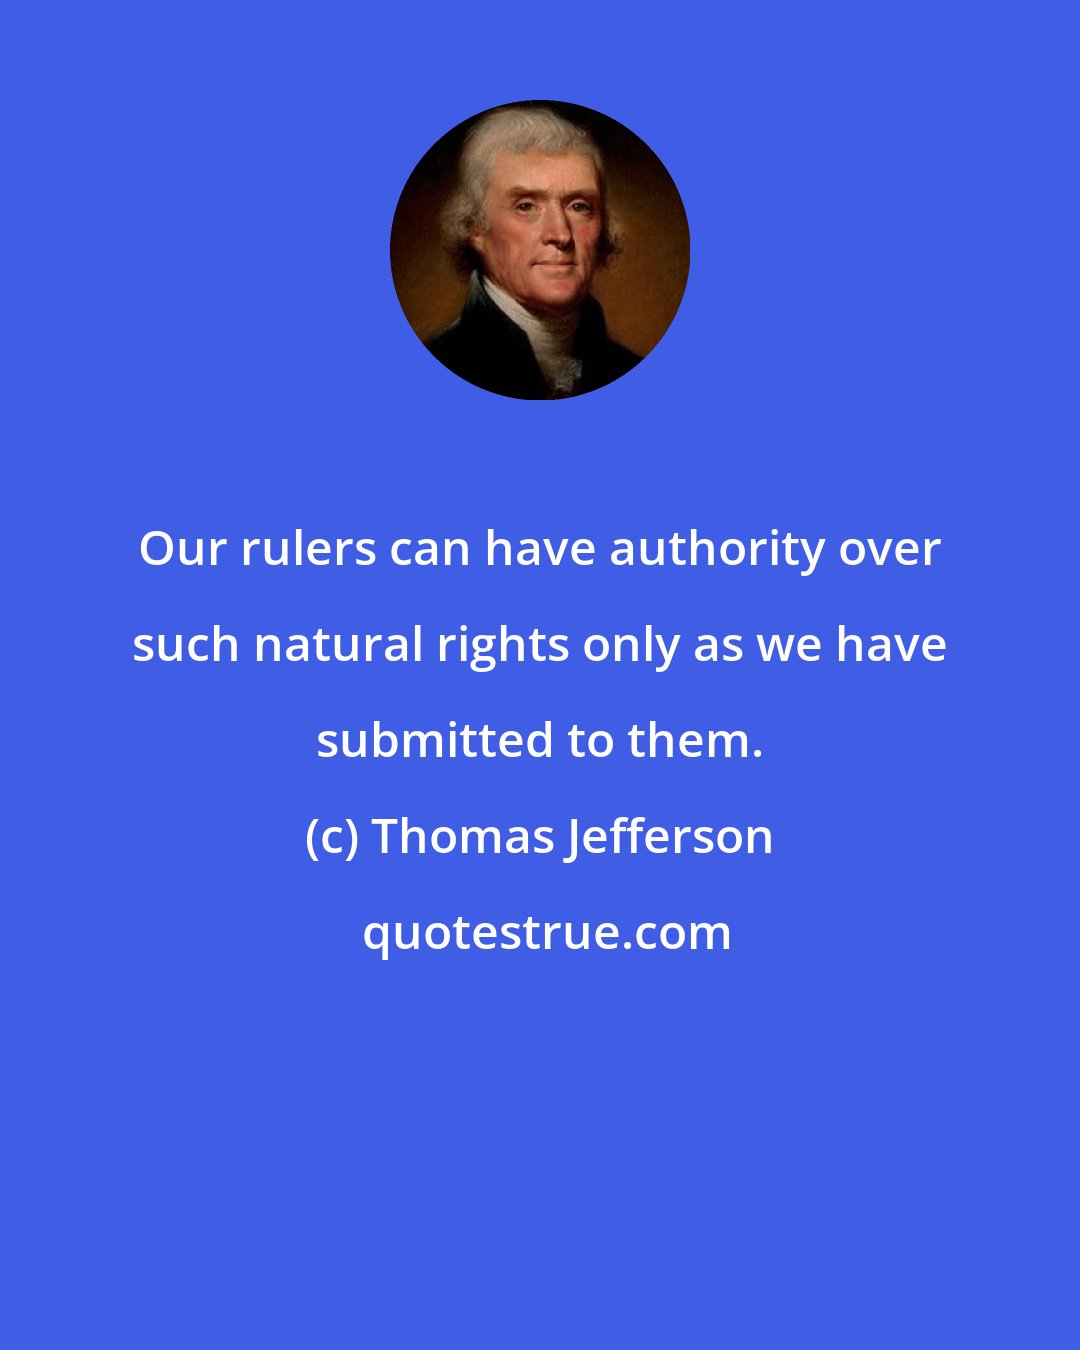 Thomas Jefferson: Our rulers can have authority over such natural rights only as we have submitted to them.